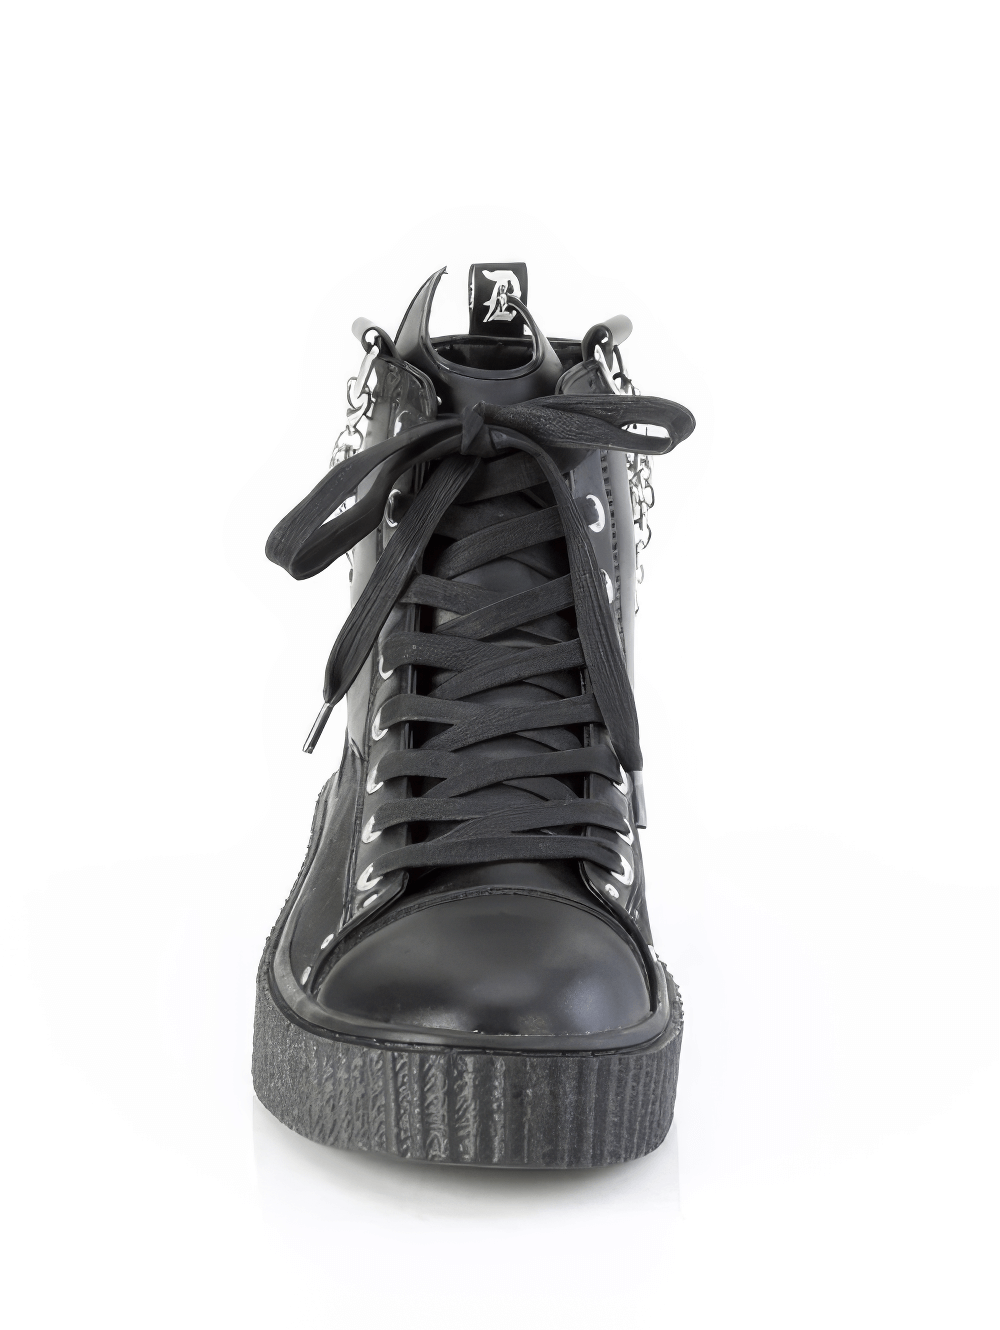 DEMONIA Gothic High-Top Sneakers with Bat Details